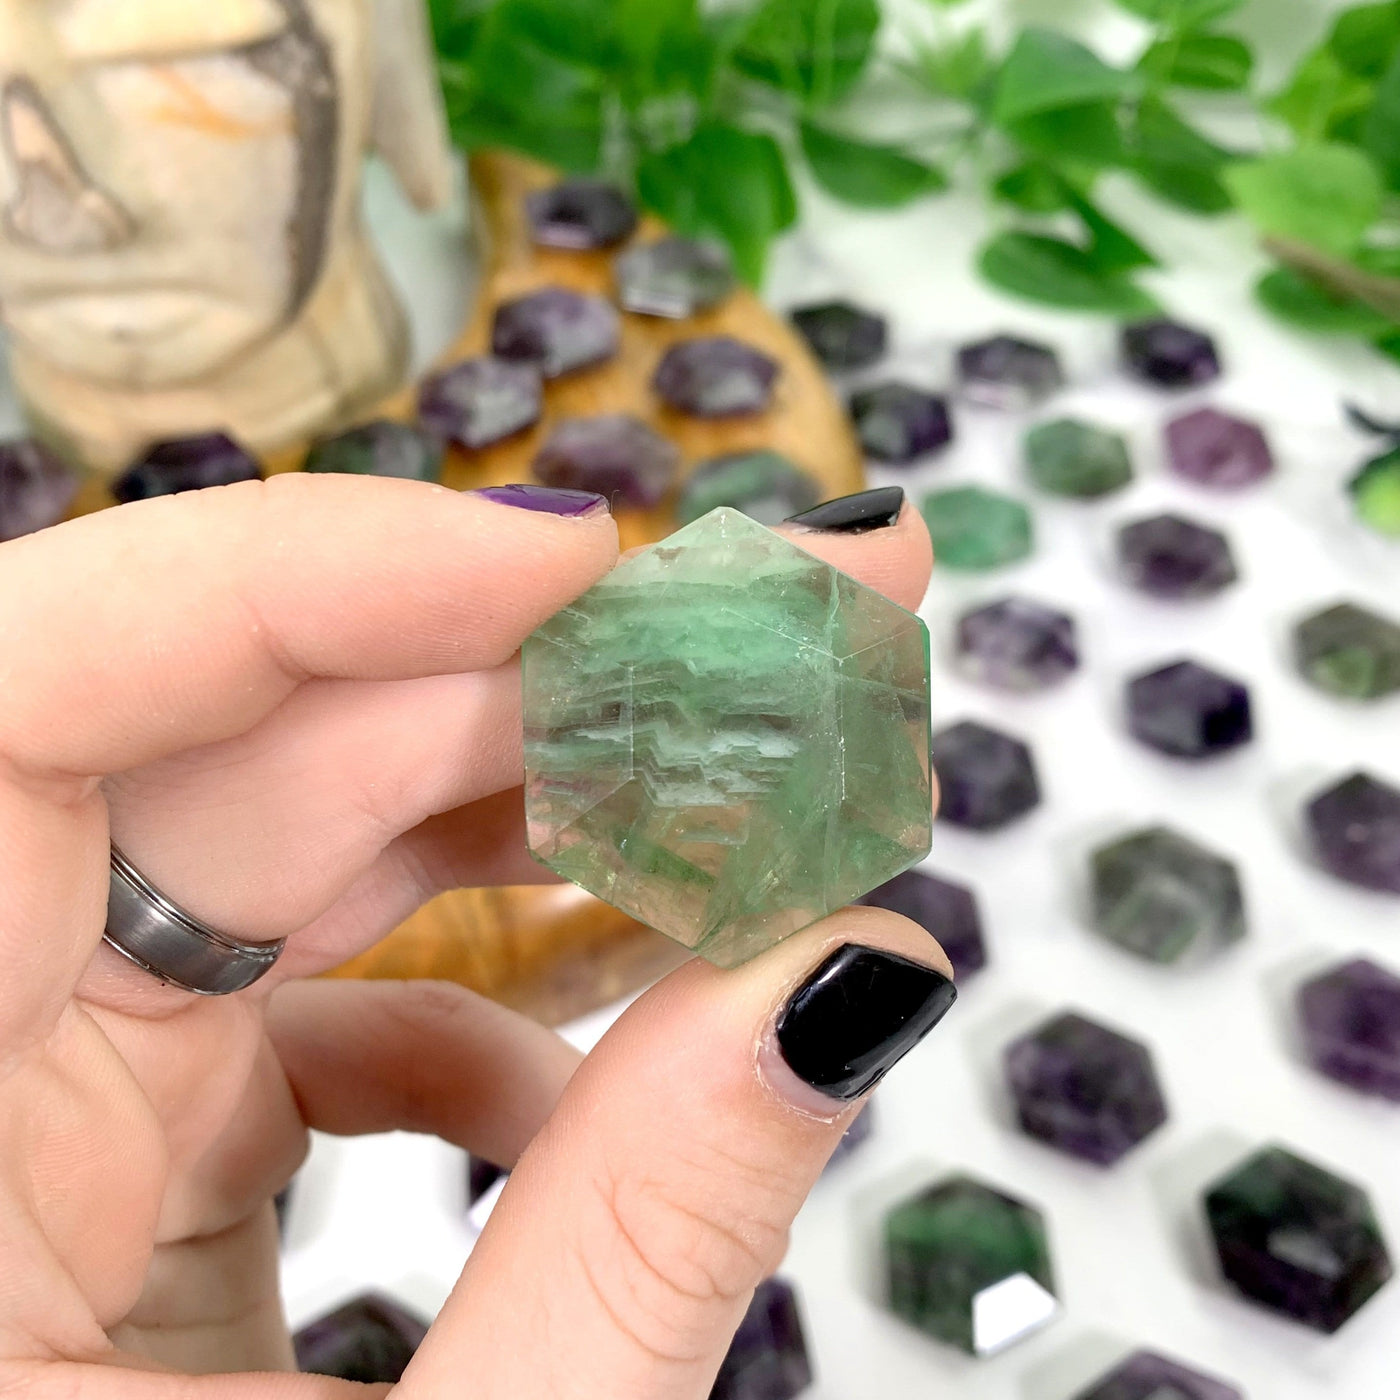 hand holding up hexagonal fluorite polished stone with decorations blurred in the background